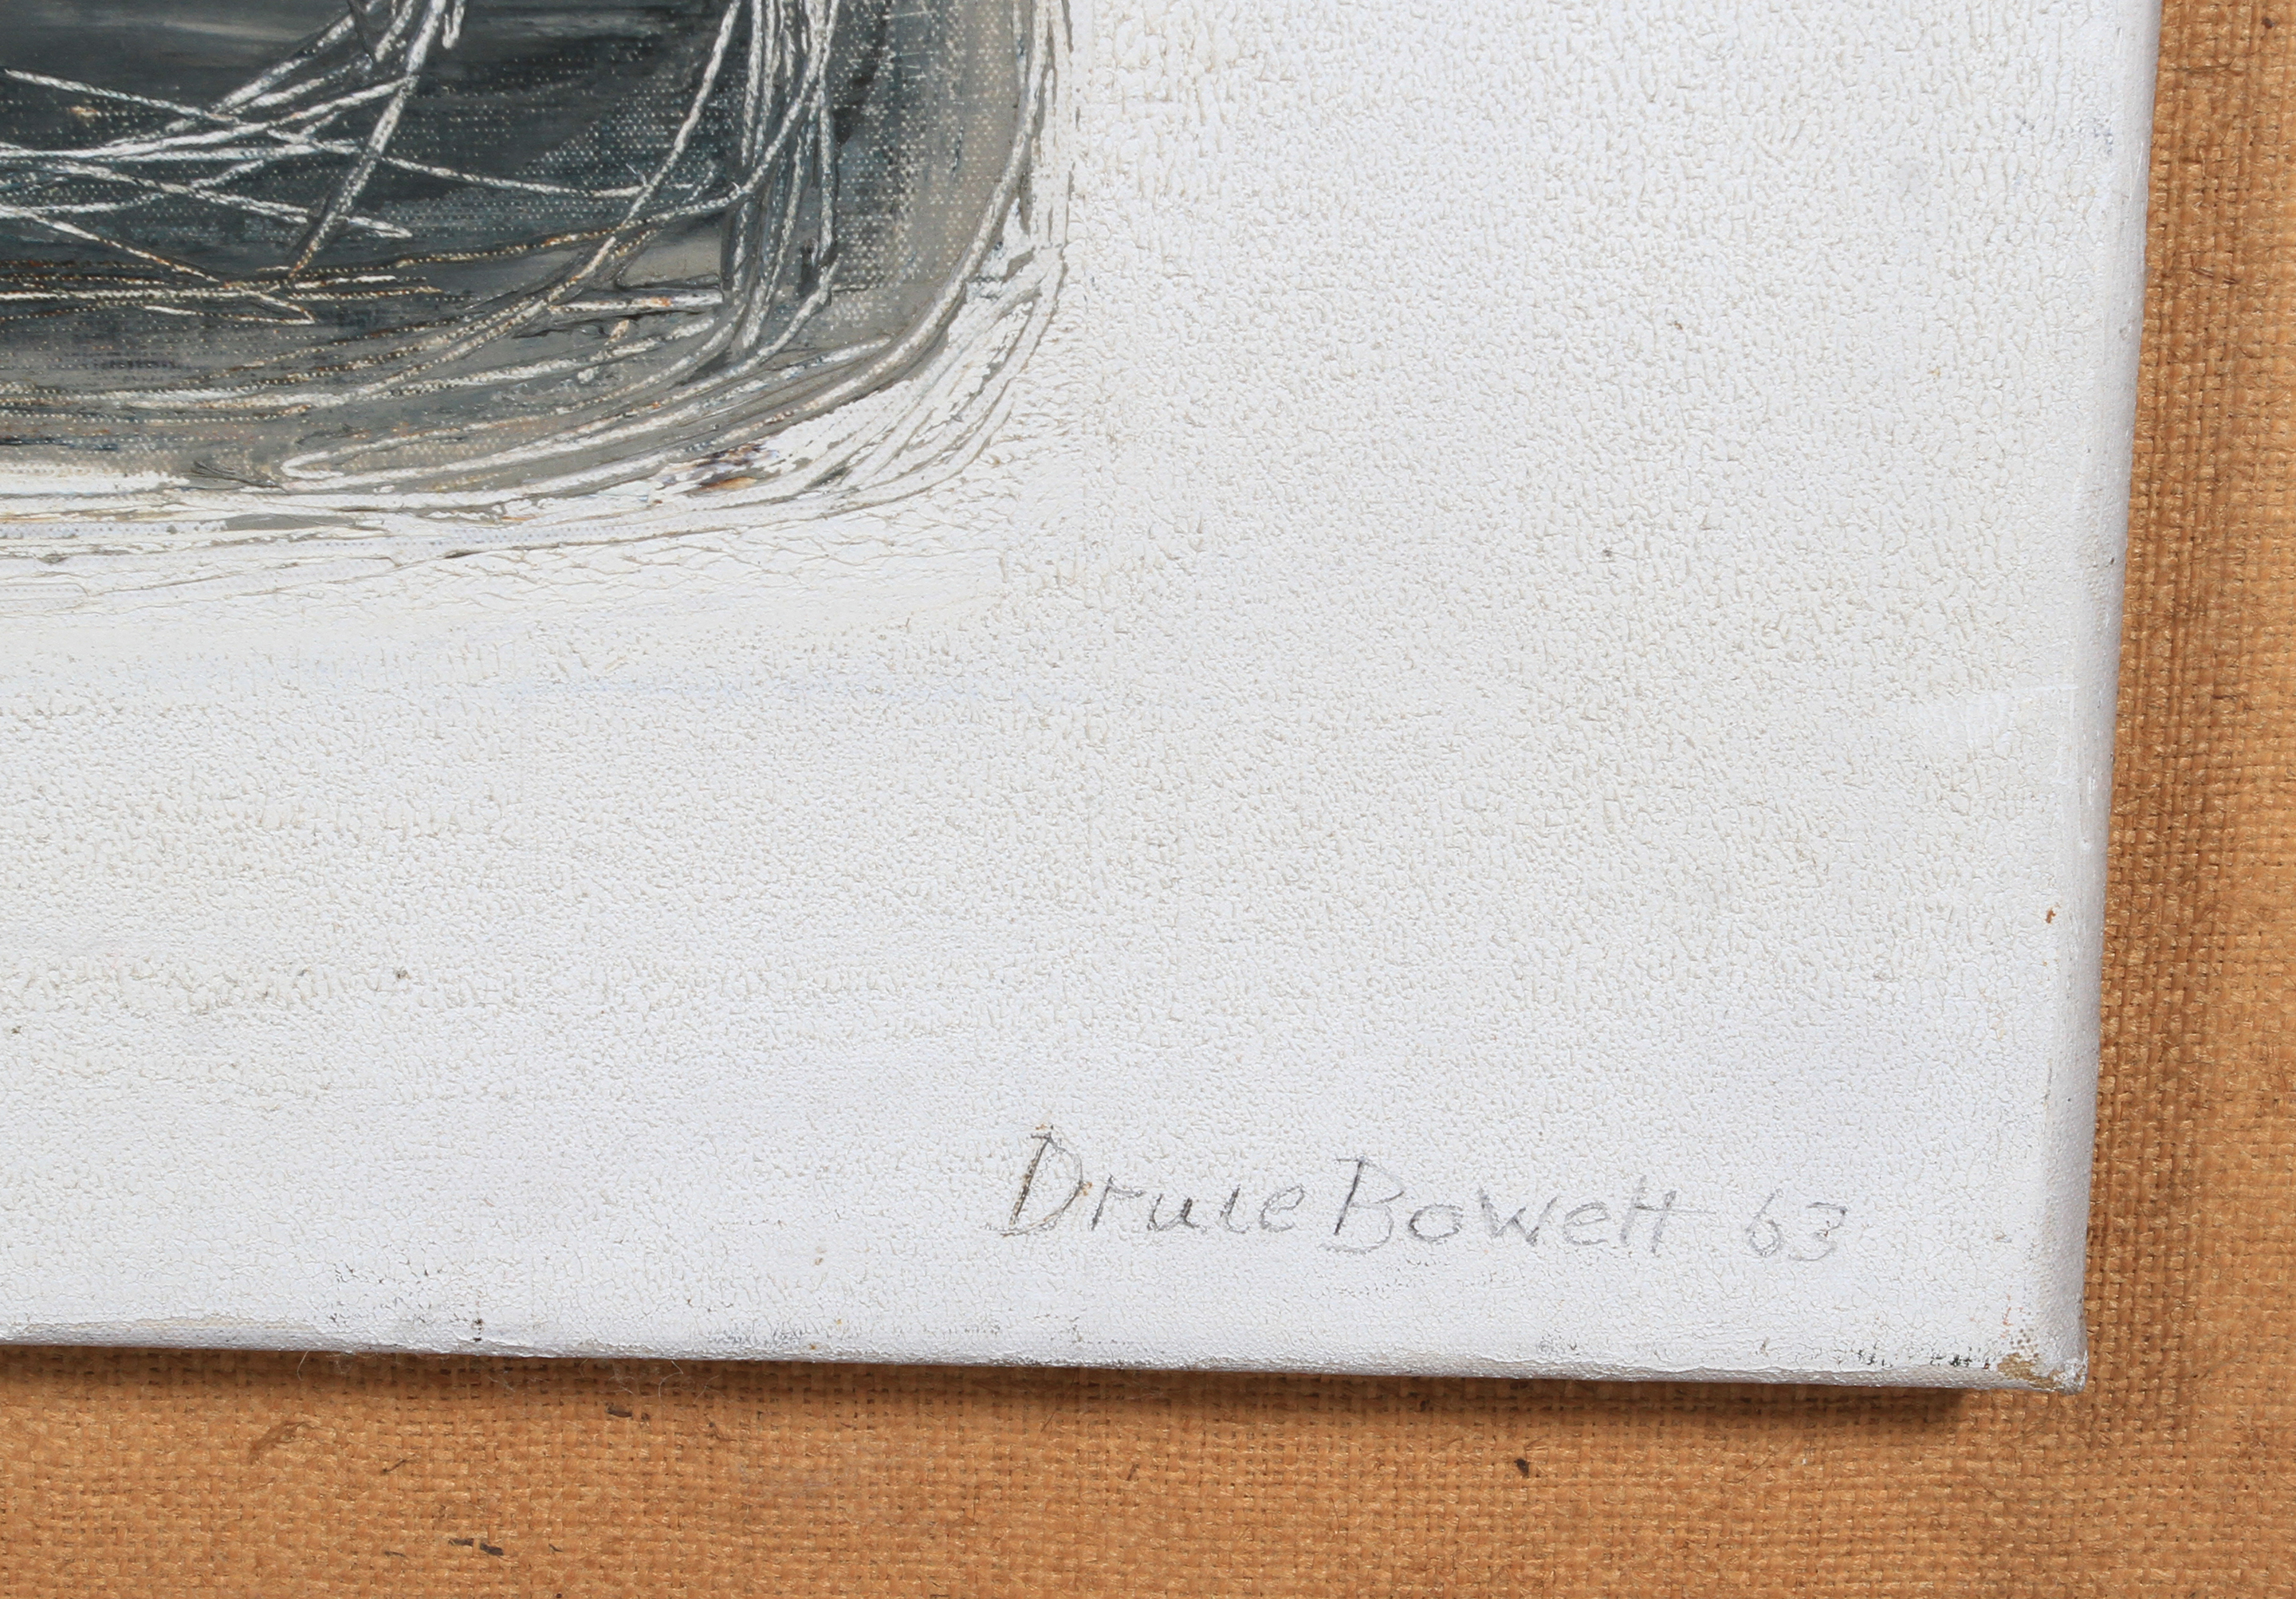 ARR DRUIE BOWETT (1924 -1998), Nerja, abstract in brown and grey on white, oil on canvas, signed and - Image 3 of 4